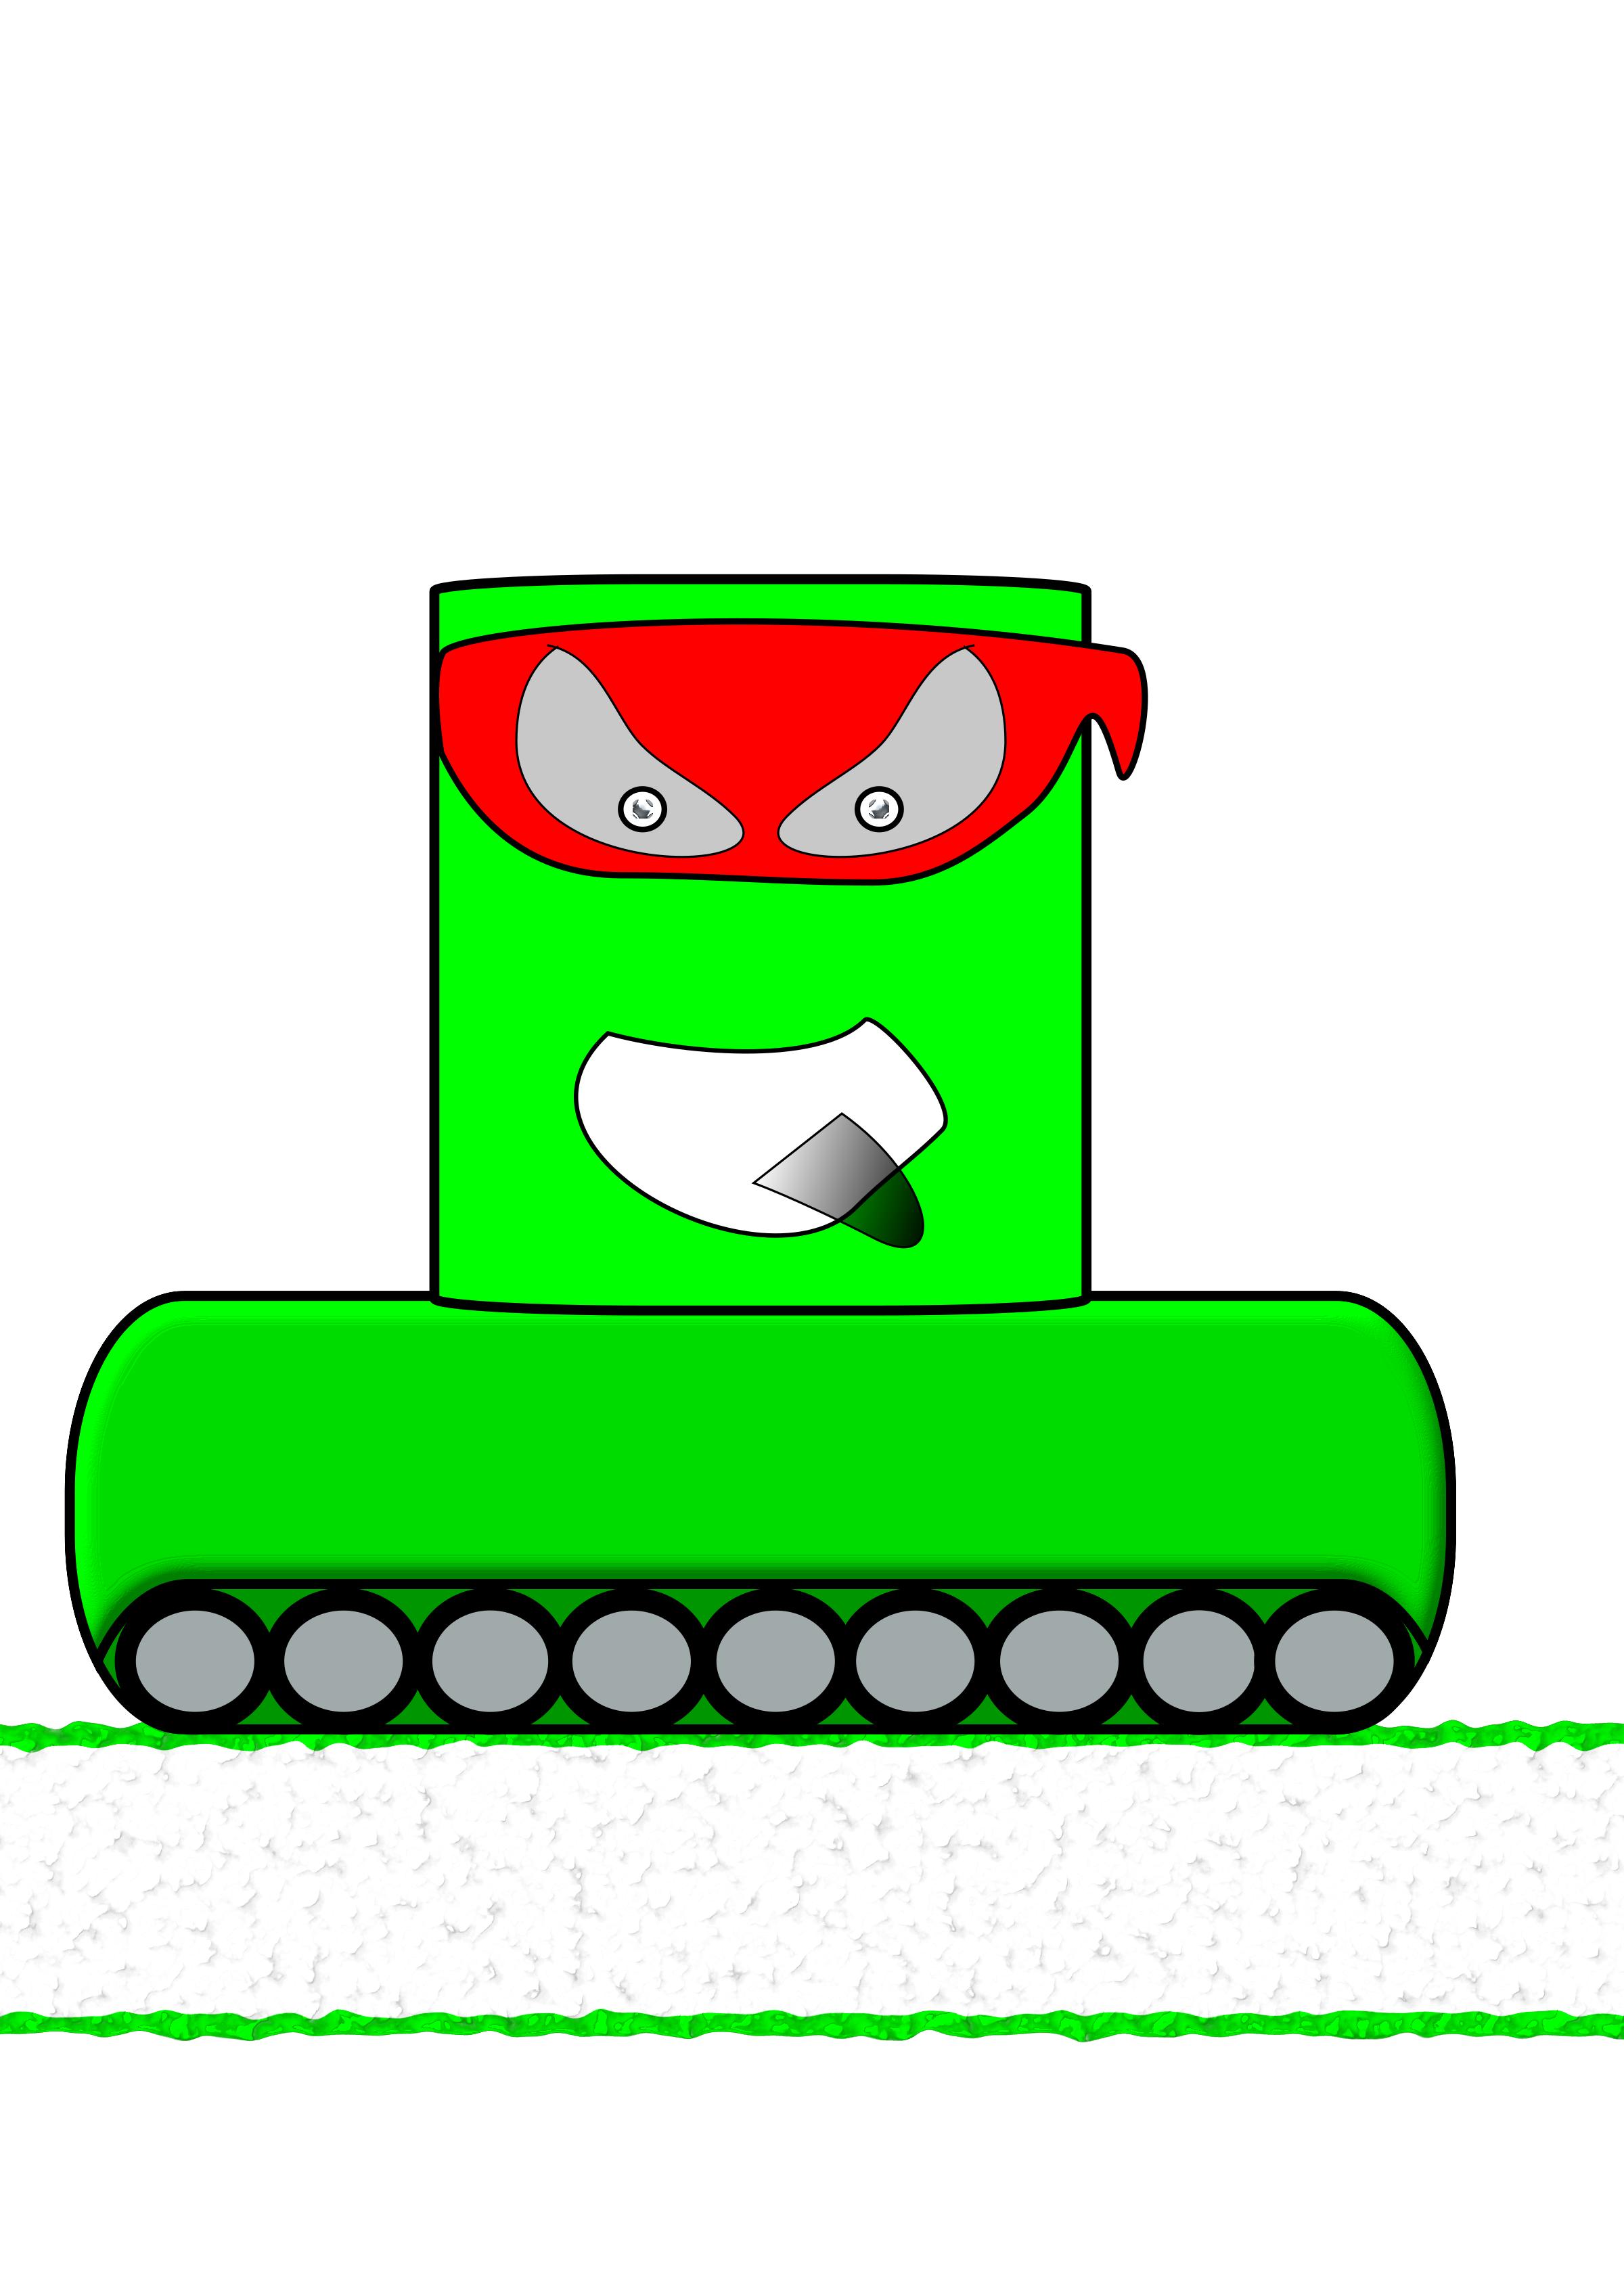 Green Canman Ninja with a continuous track png